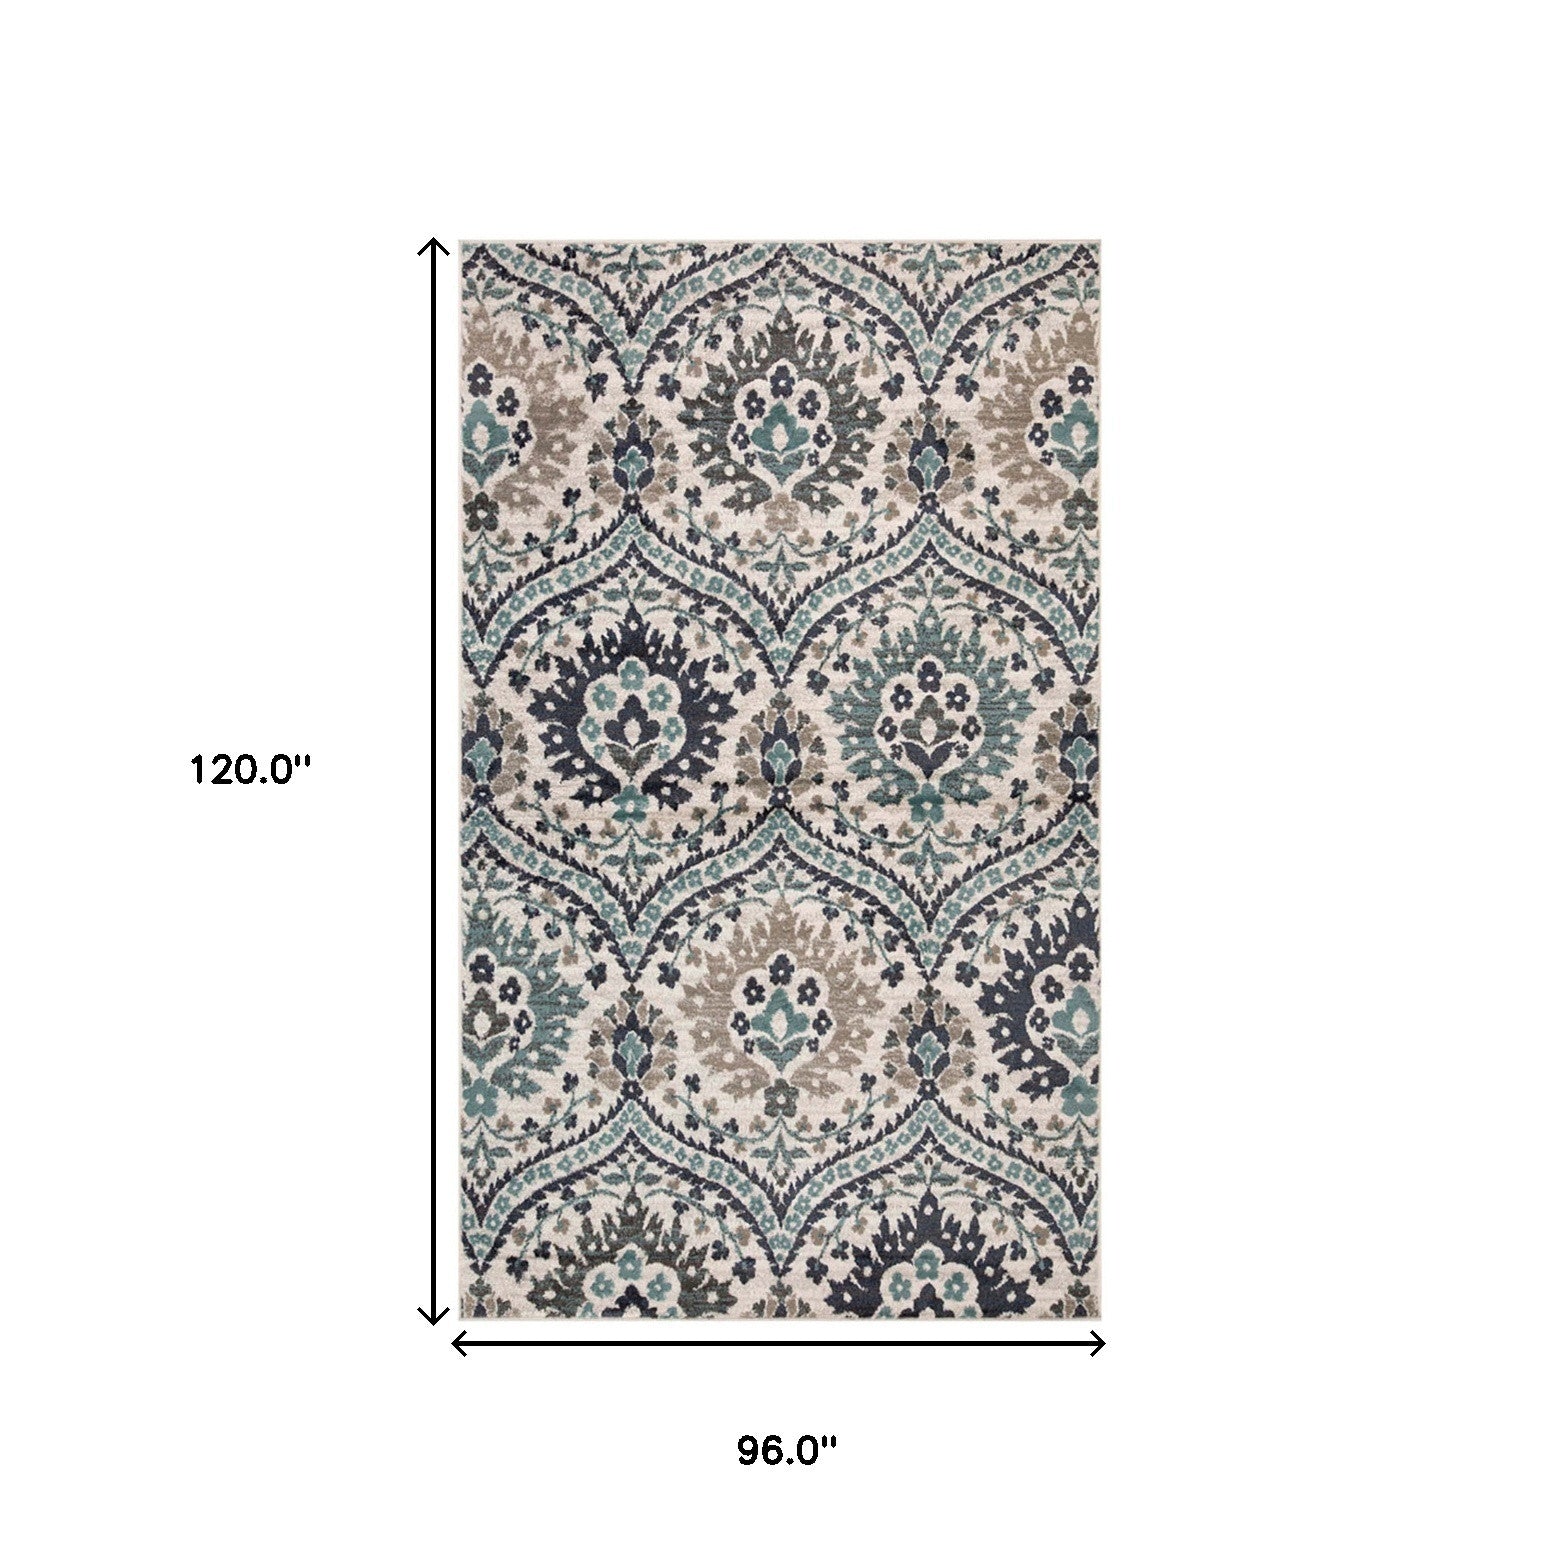 8' X 10' Ivory Blue And Gray Floral Stain Resistant Area Rug